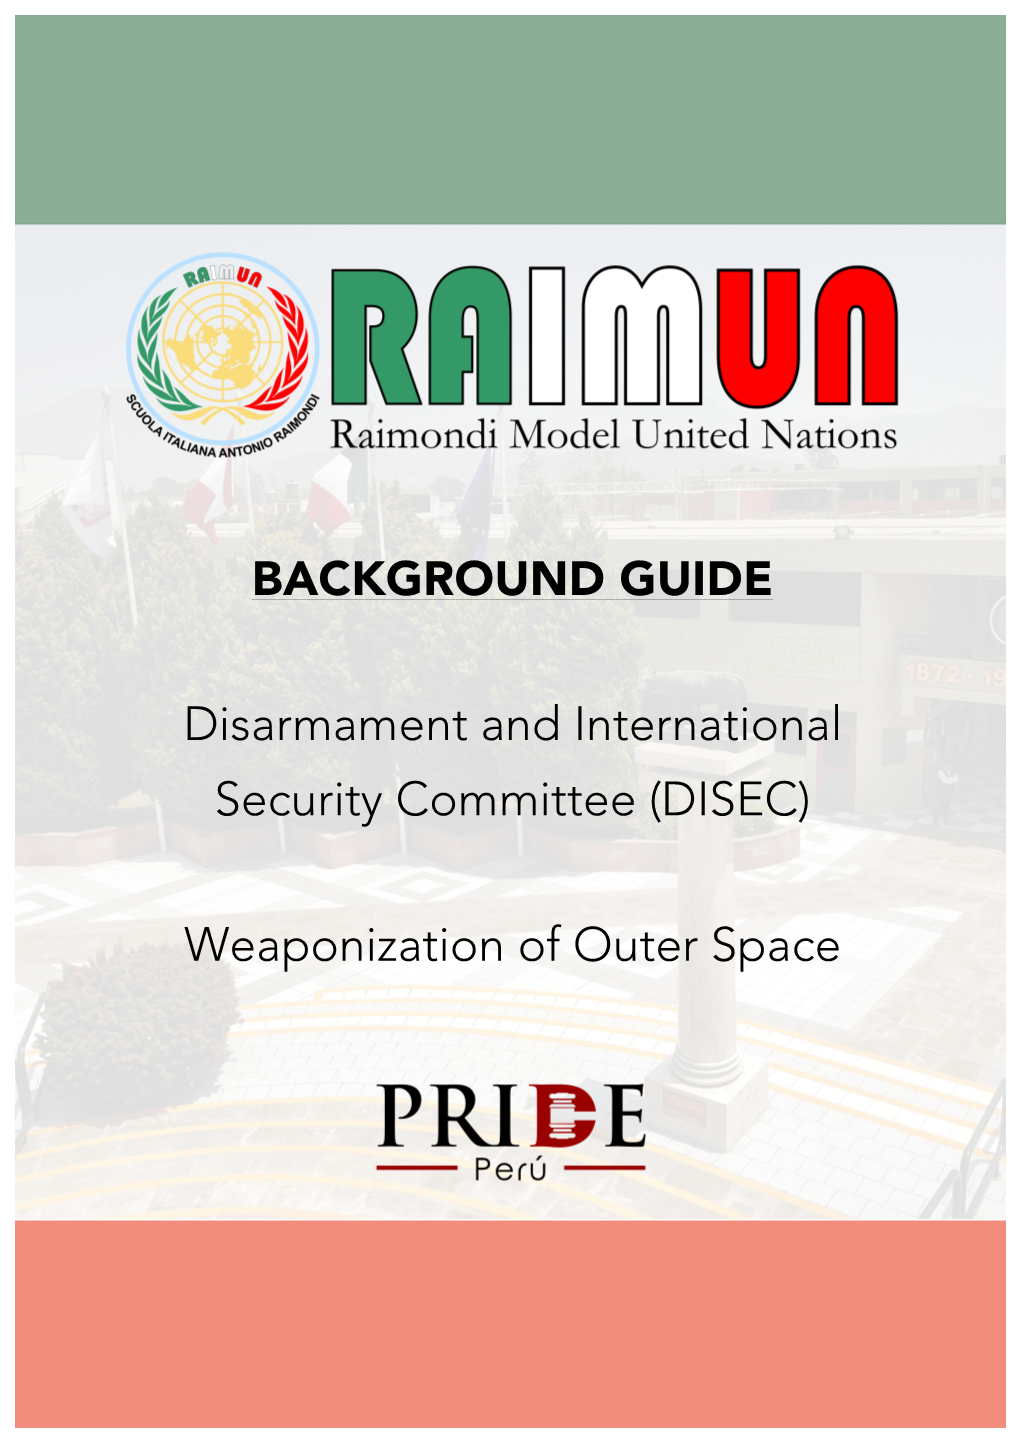 (DISEC) Weaponization of Outer Space